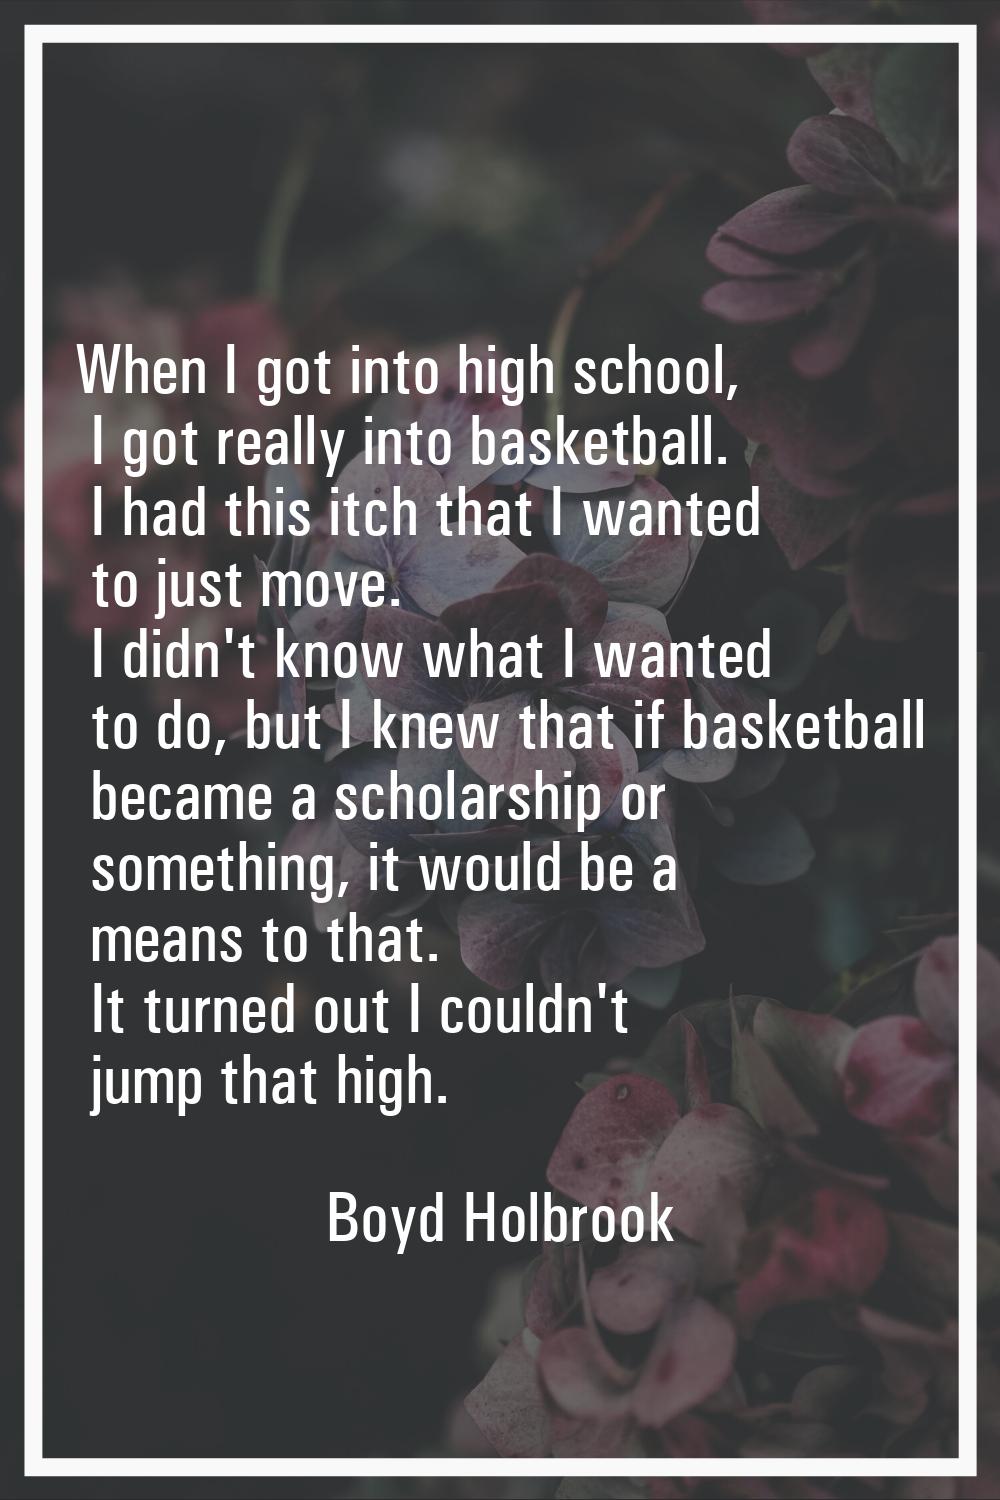 When I got into high school, I got really into basketball. I had this itch that I wanted to just mo